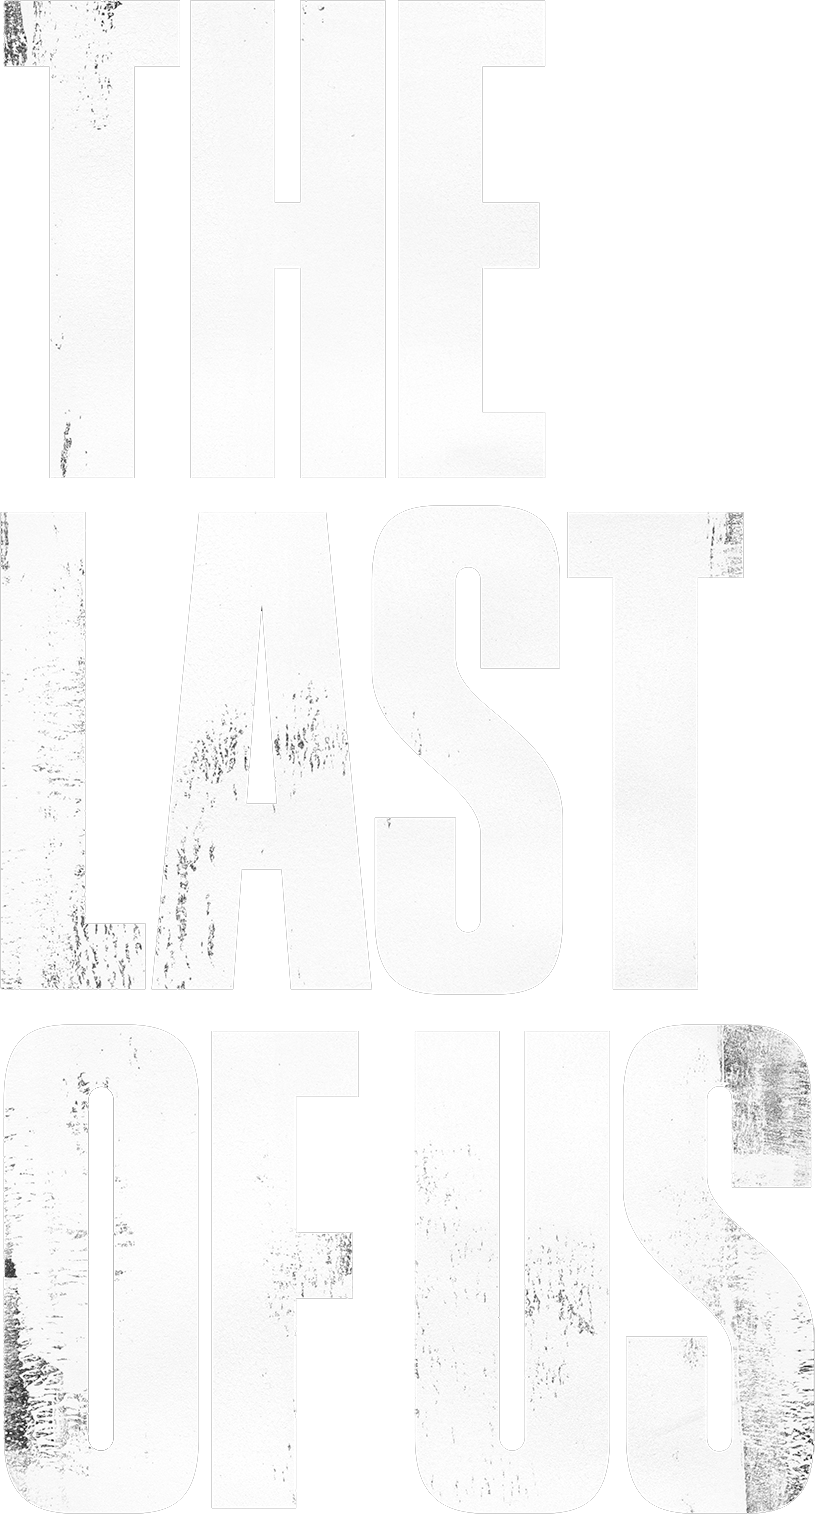 The Last Of Us Logo PNG